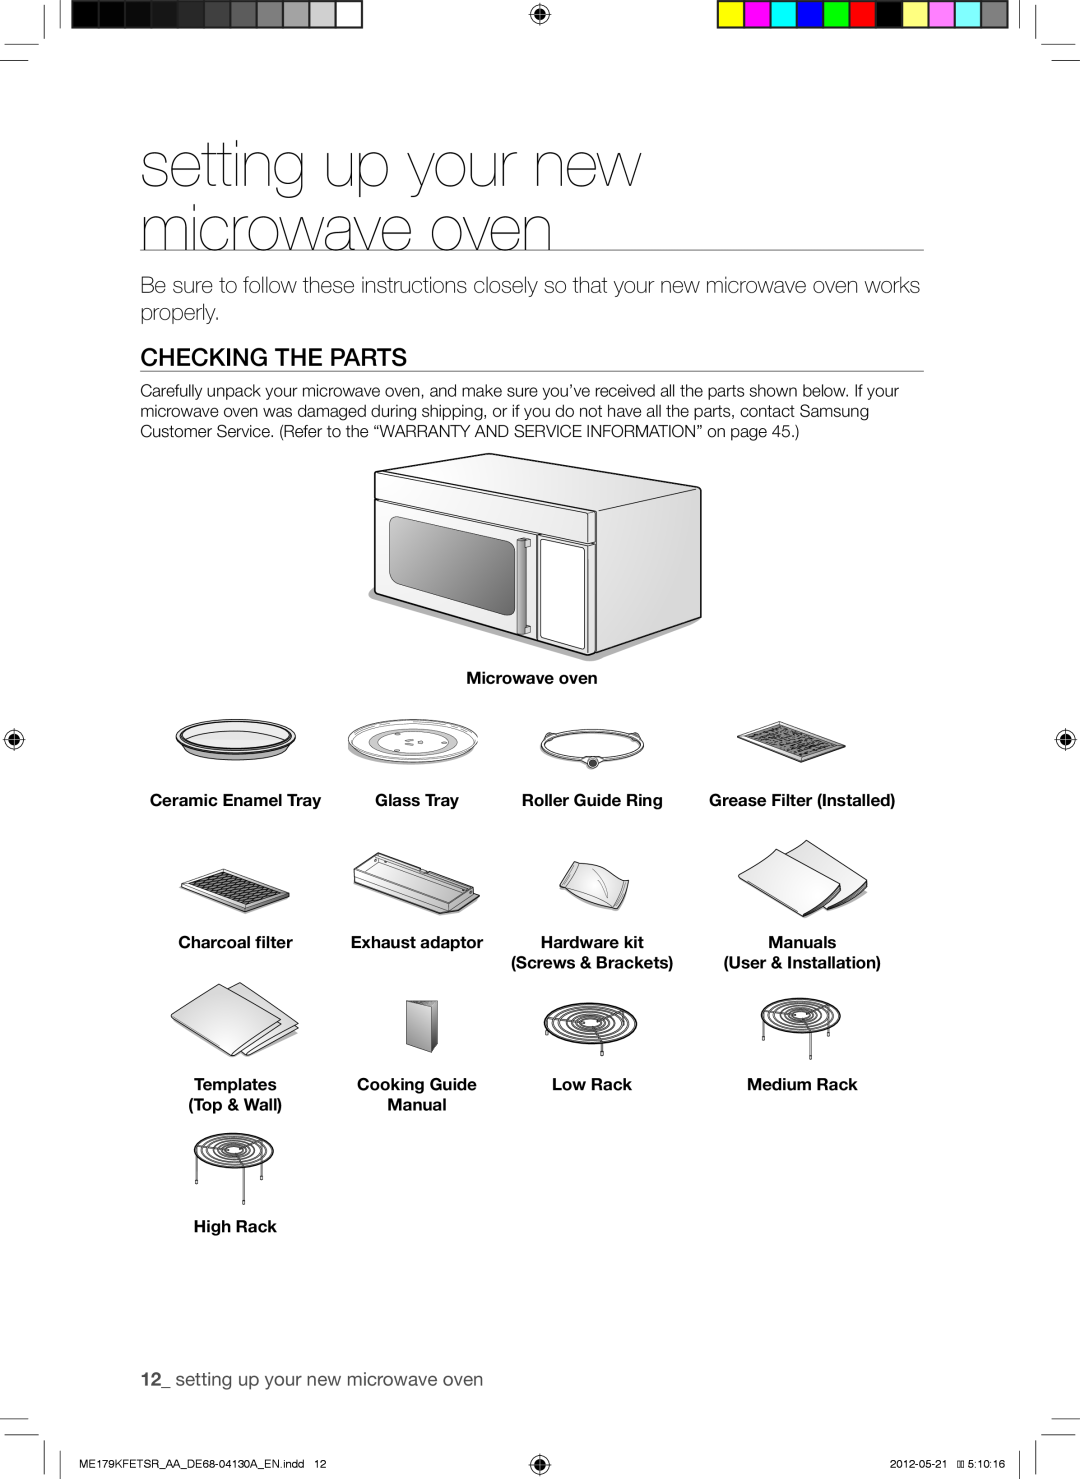 Samsung ME179KFETSR user manual Checking The Parts, setting up your new microwave oven 